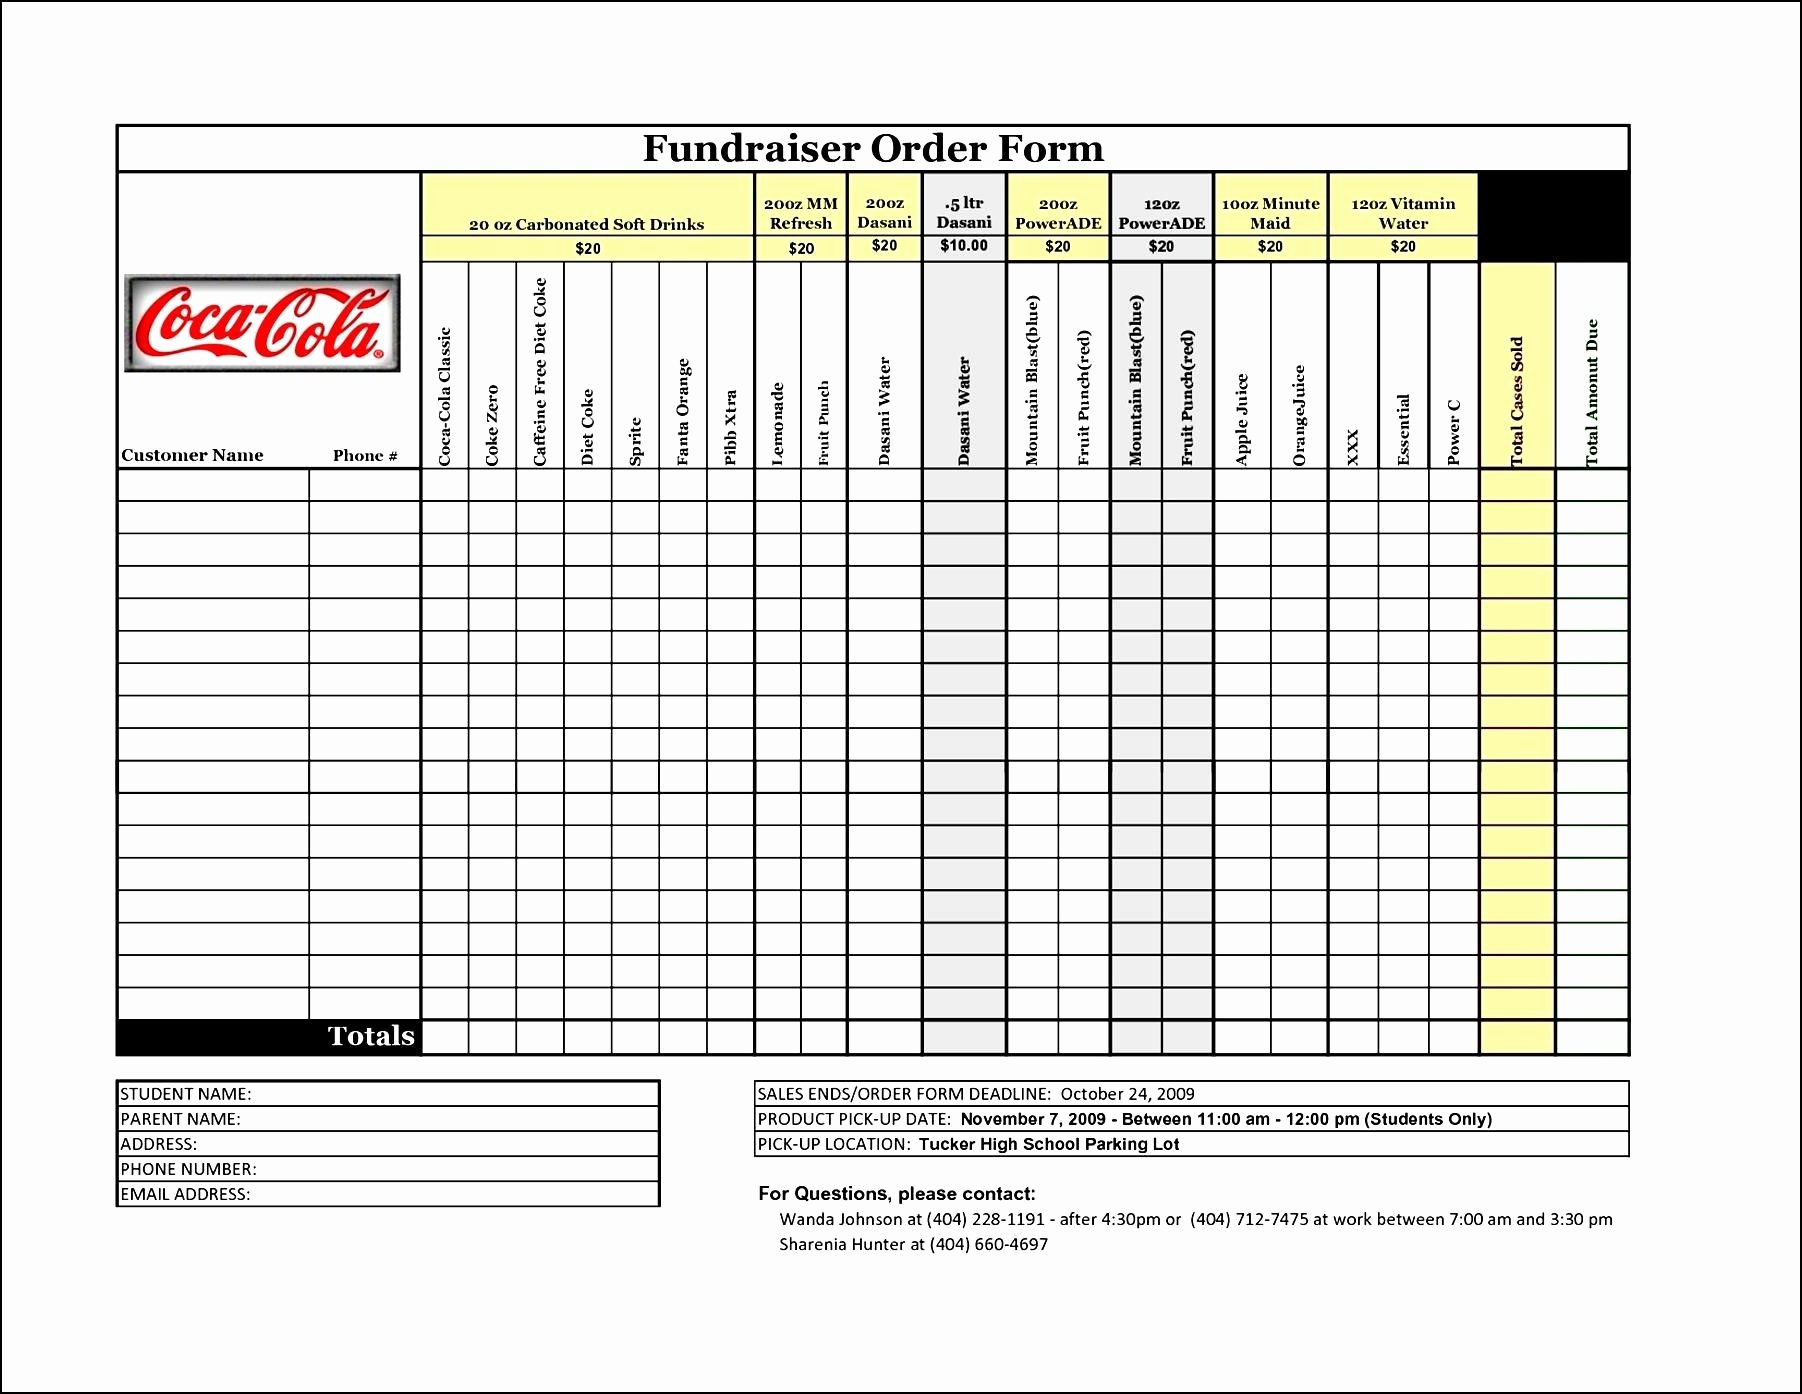 Fundraiser form Template Free Best Of Free Fundraiser order form Template